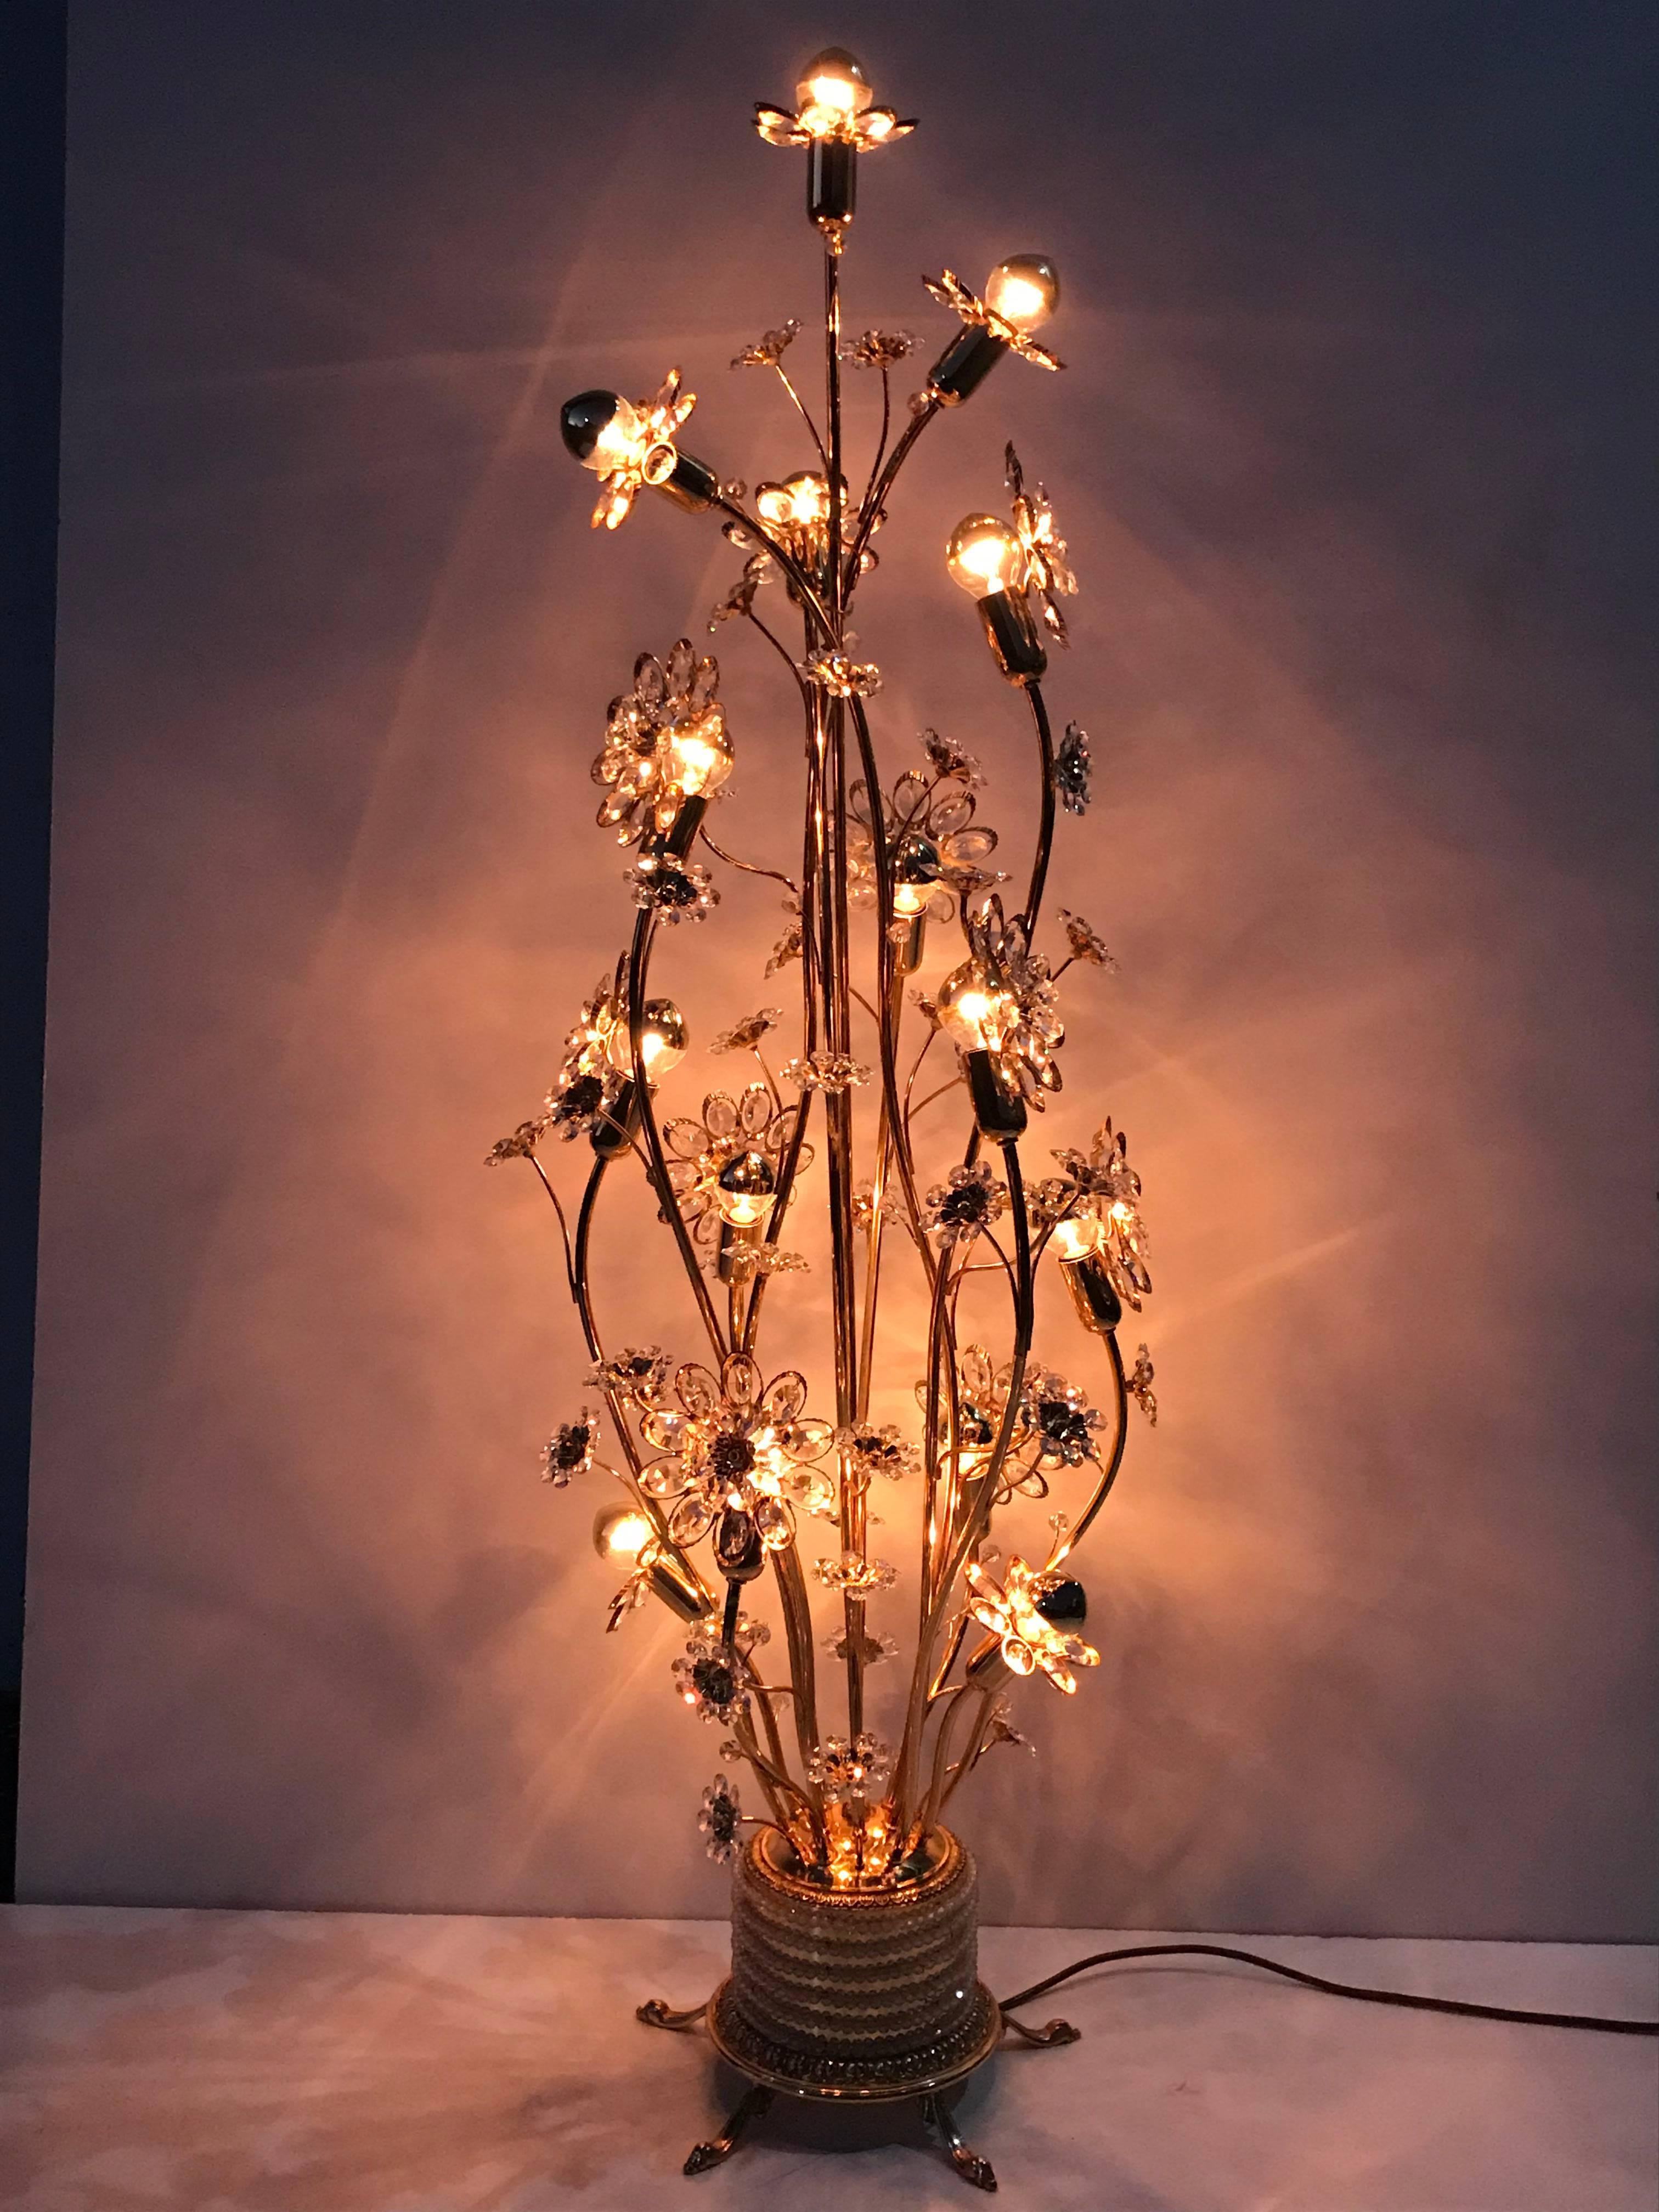 Enchanting illuminated crystal flower and brass floor lamp by Palwa
Uses up to 40watt E14 base bulbs. Photographed with 25watt bulbs (bulbs not included )
Has an on/off foot switch.